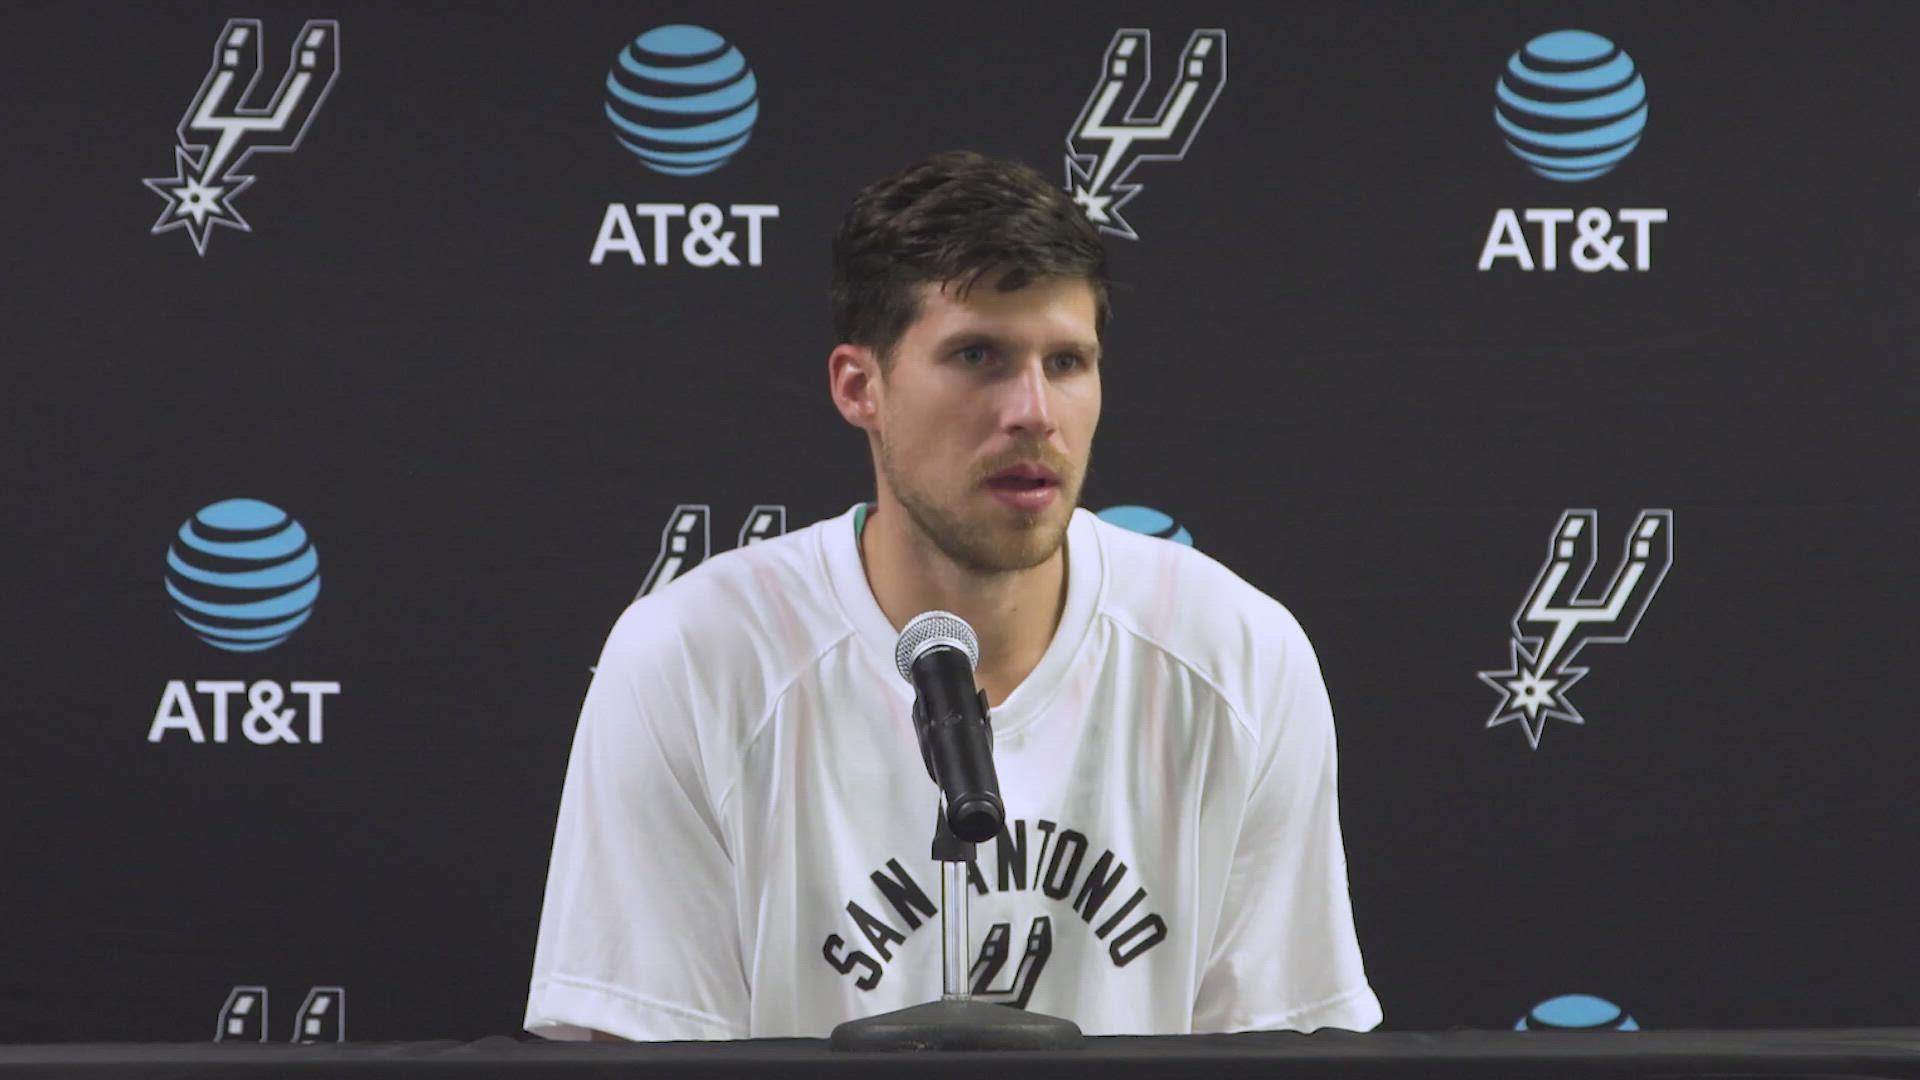 The San Antonio small forward said the team needs to work on not getting complacent after individual games.